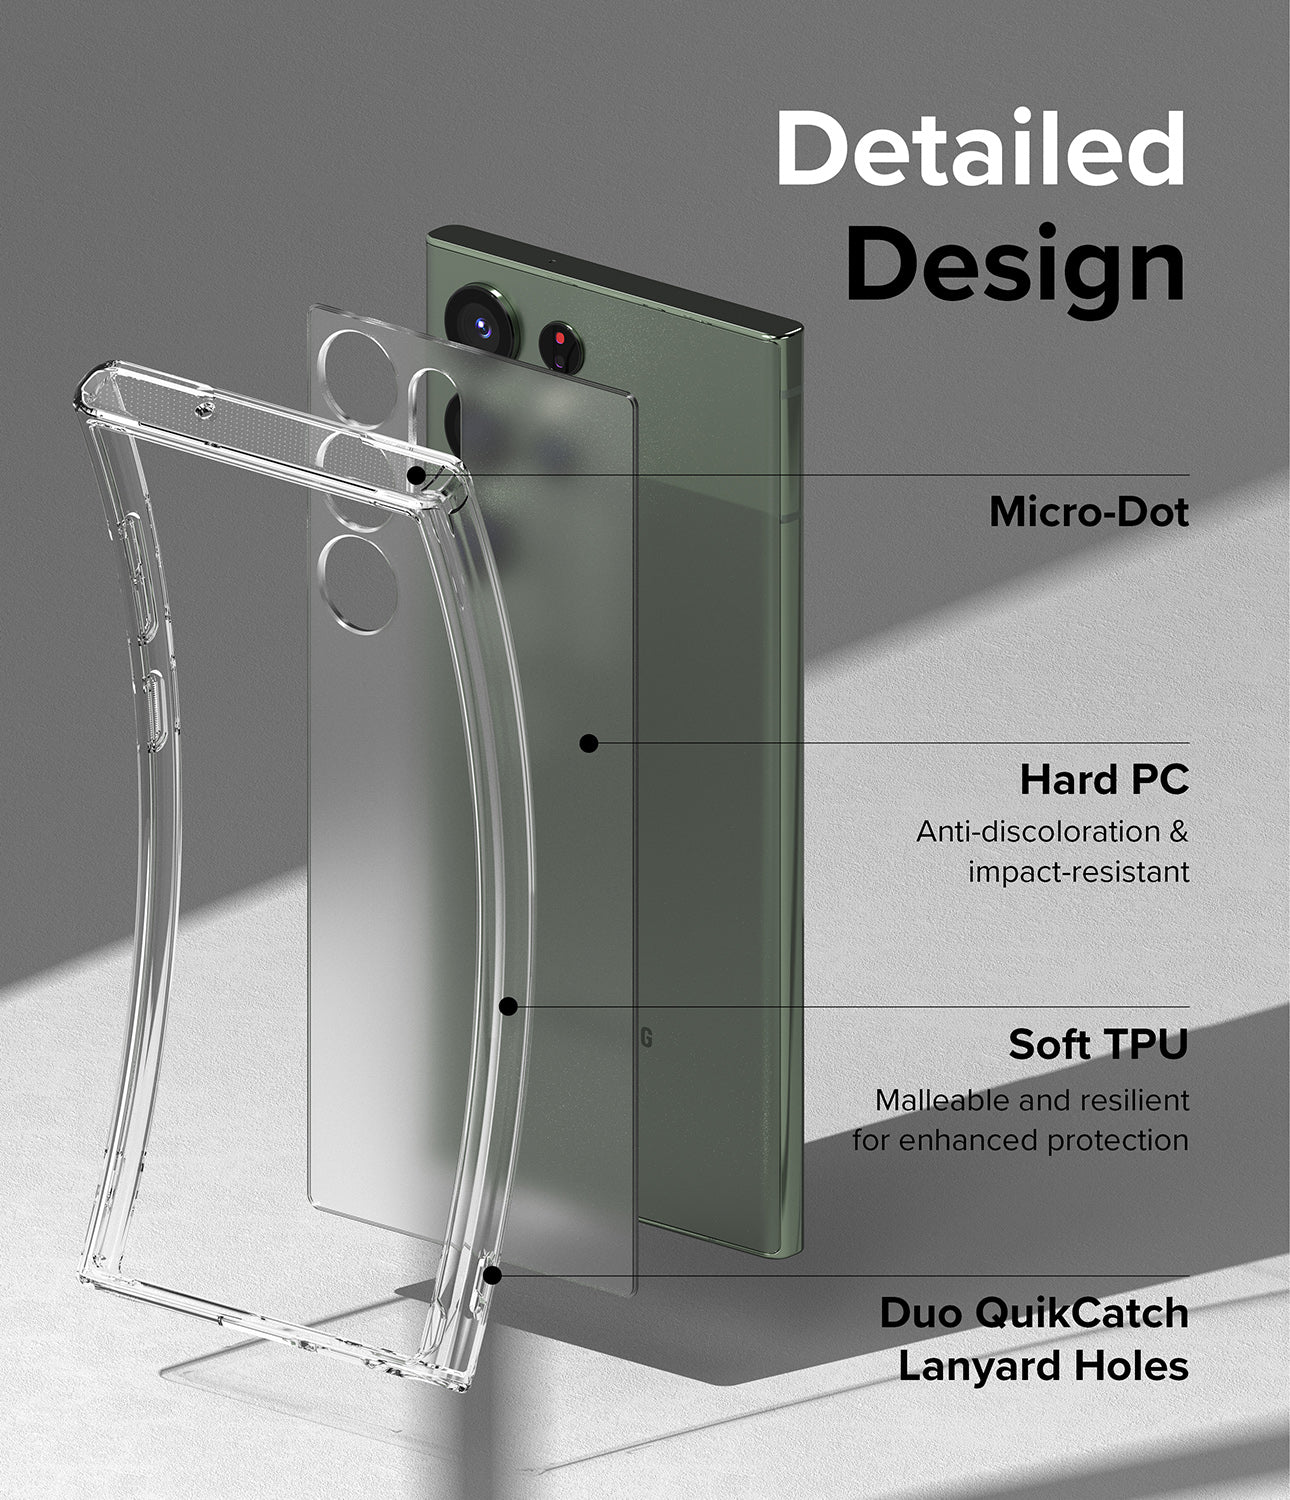 Galaxy S23 Ultra Case | Fusion - Matte Clear - Detailed Design. Micro-Dot. Anti-discoloration and impact-resistant with Hard PC. Malleable and resilient for enhanced protection with Soft TPU. Duo QuikCatch Lanyard Holes.